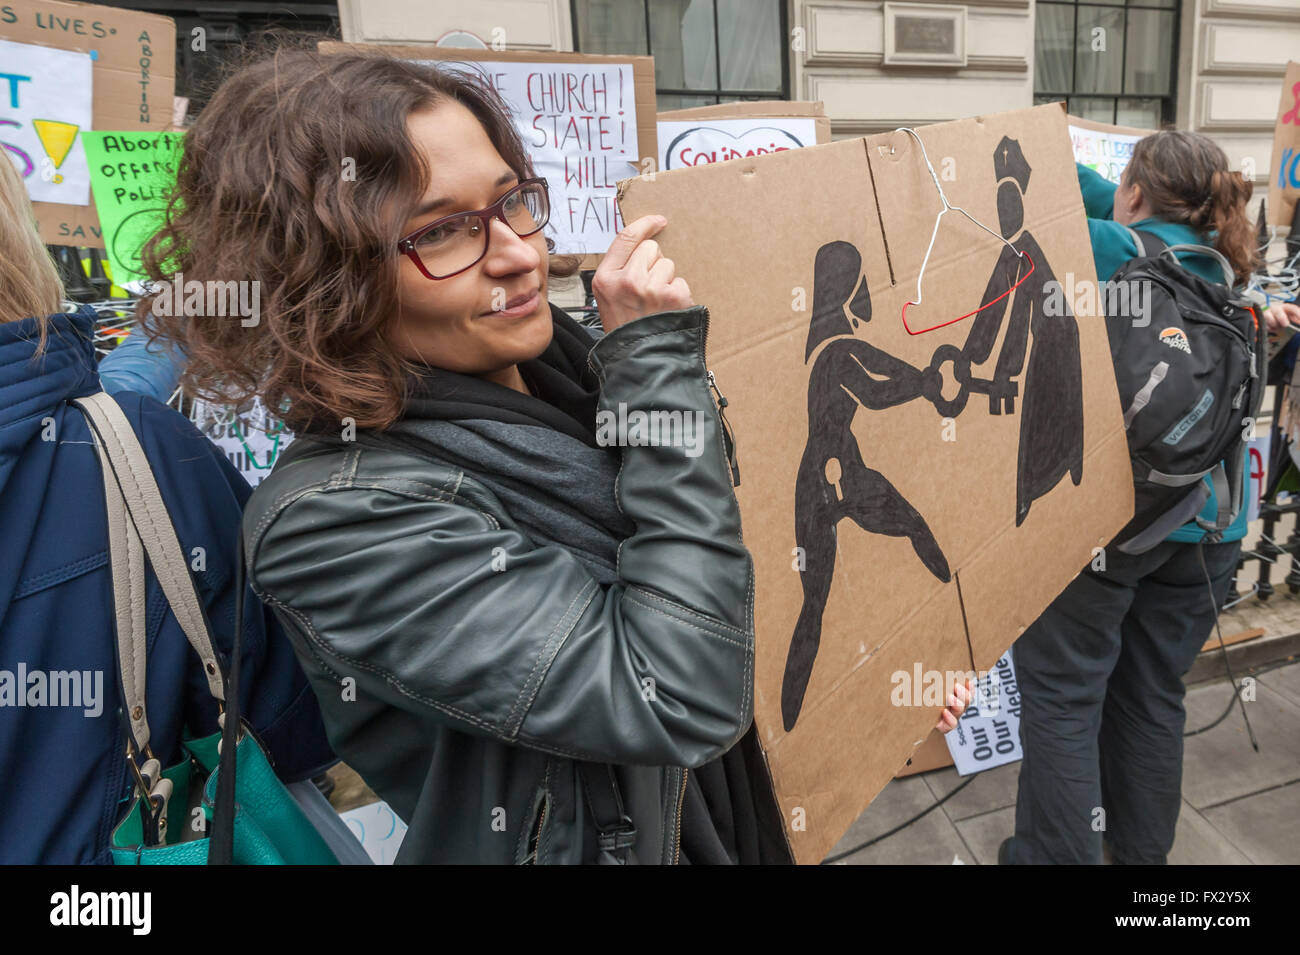 London, UK. 9th April, 2016. A woman holds a poster with a wire coat hanger, the traditional crude tool of back-street abortionists, on it ooutside the Polish embassy. The poster shows a woman wrestling a key from a Catholic bishop. The London protest followed large protests in Poland against the bill proposed by the Law and Justice Party (PiS) which will outlaw abortion in all cases, protecting the life of the unborn child even where this may cause extreme distress or even death for the mother. Peter Marshall/Alamy Live News Stock Photo